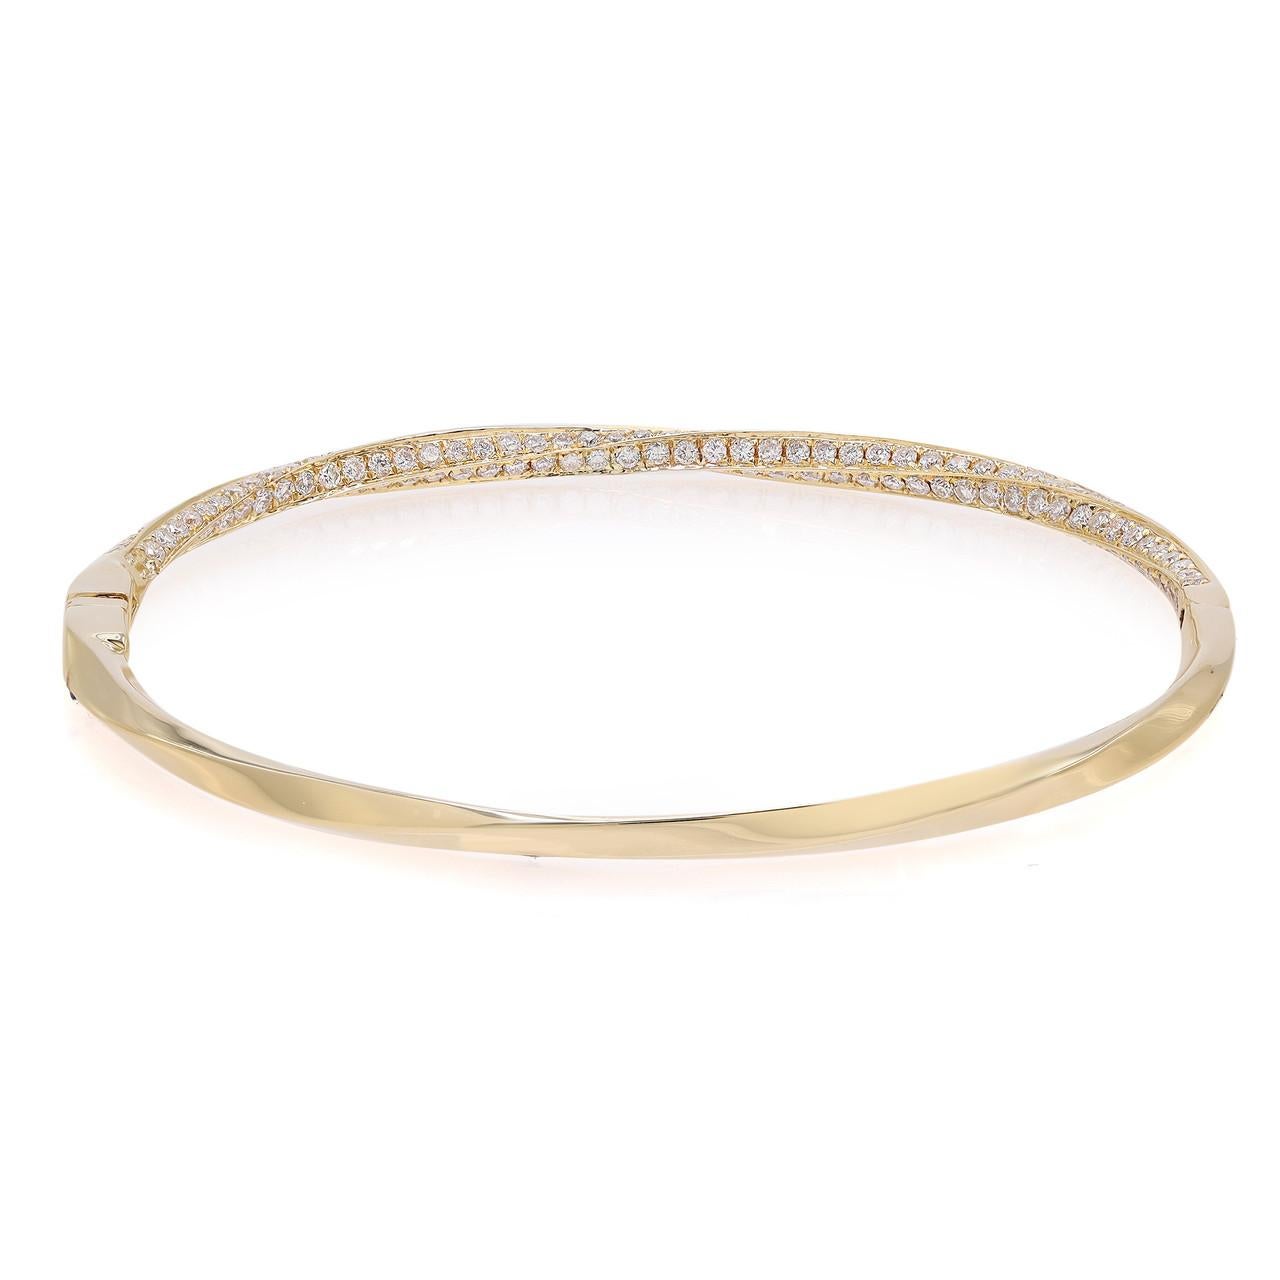 Introducing our exquisite 2.07 Carat Round Cut Diamond Twist Bangle Bracelet in Yellow Gold. This captivating piece combines the elegance of a twist design with the brilliance of pave diamonds, creating a truly stunning accessory. Crafted in yellow